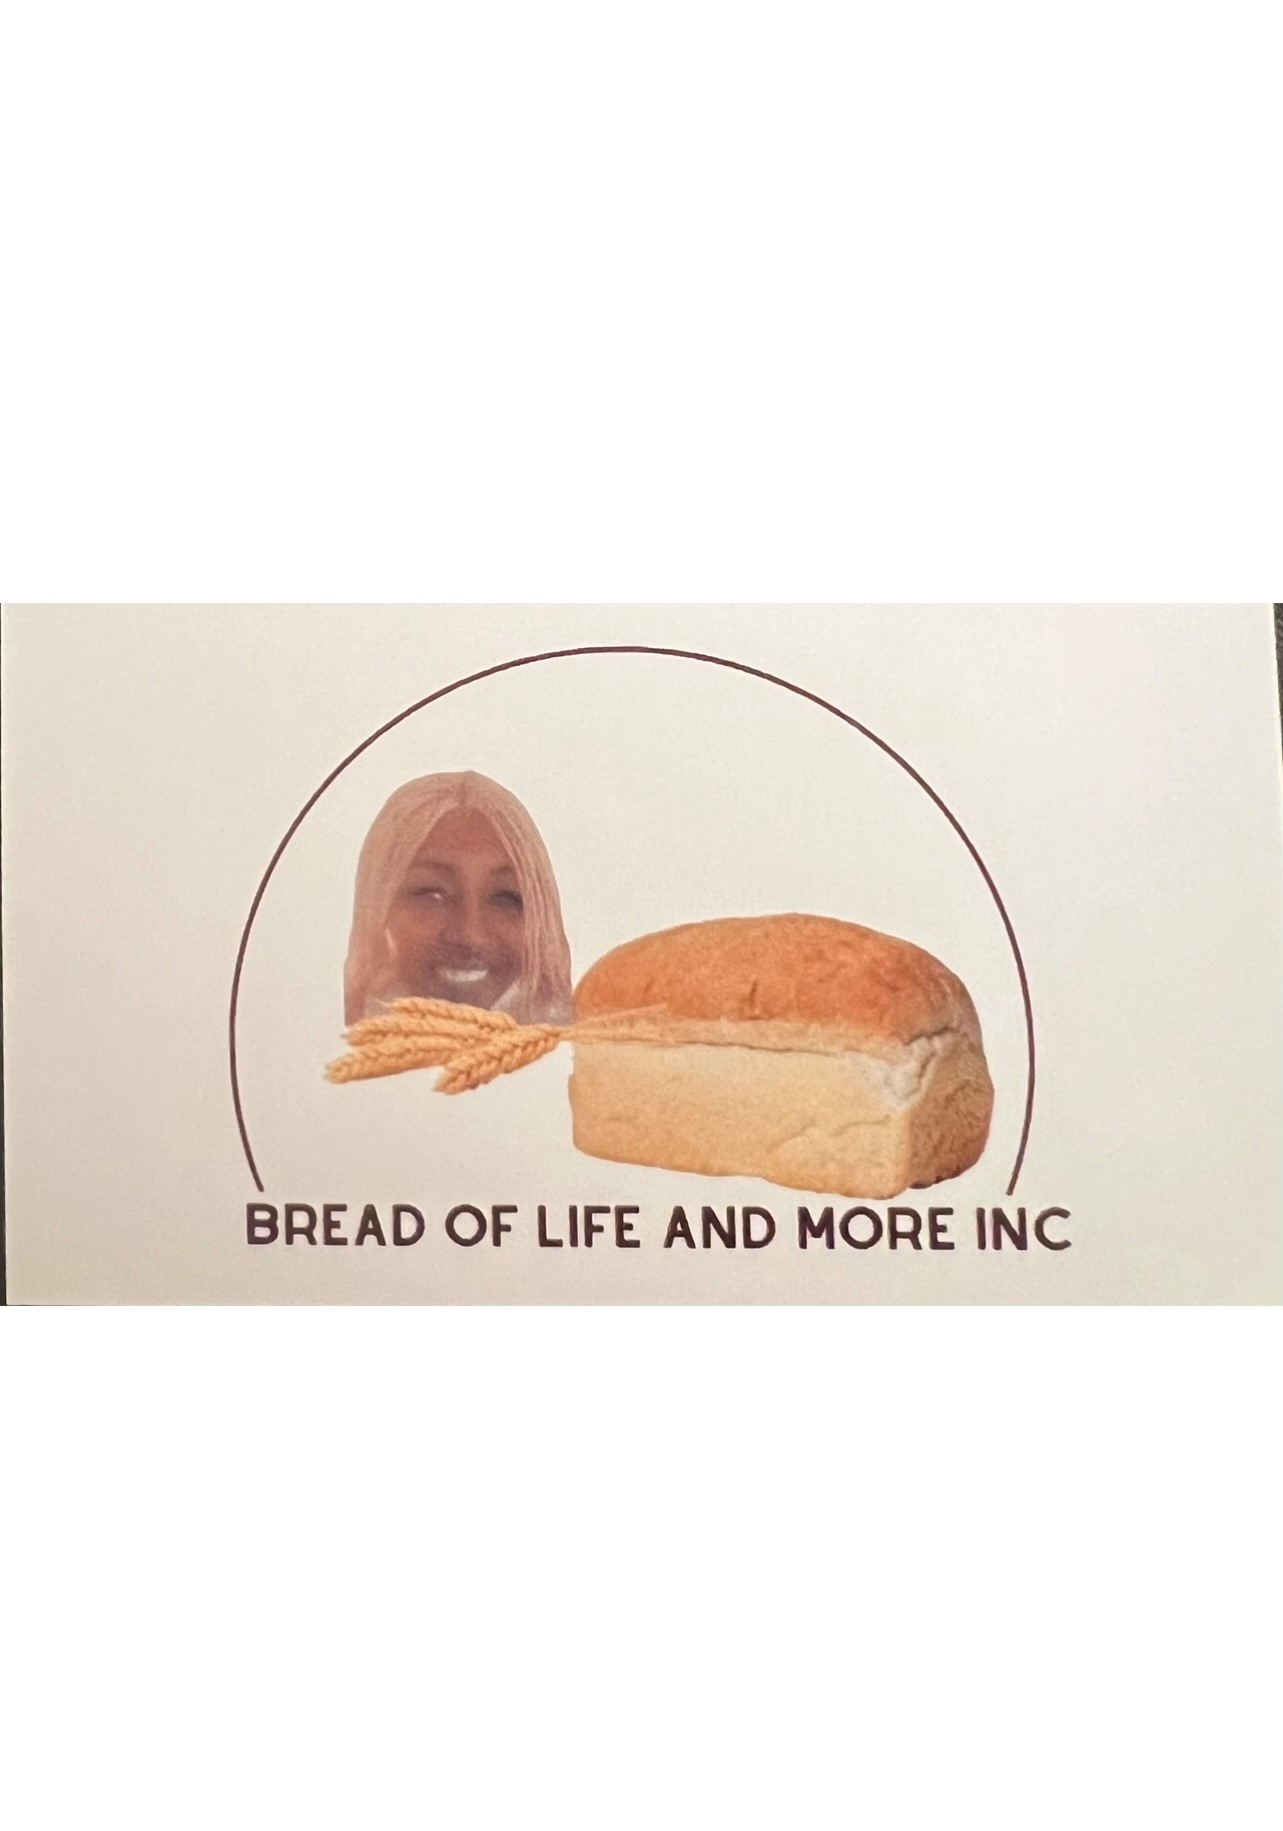 Bread of Life and More